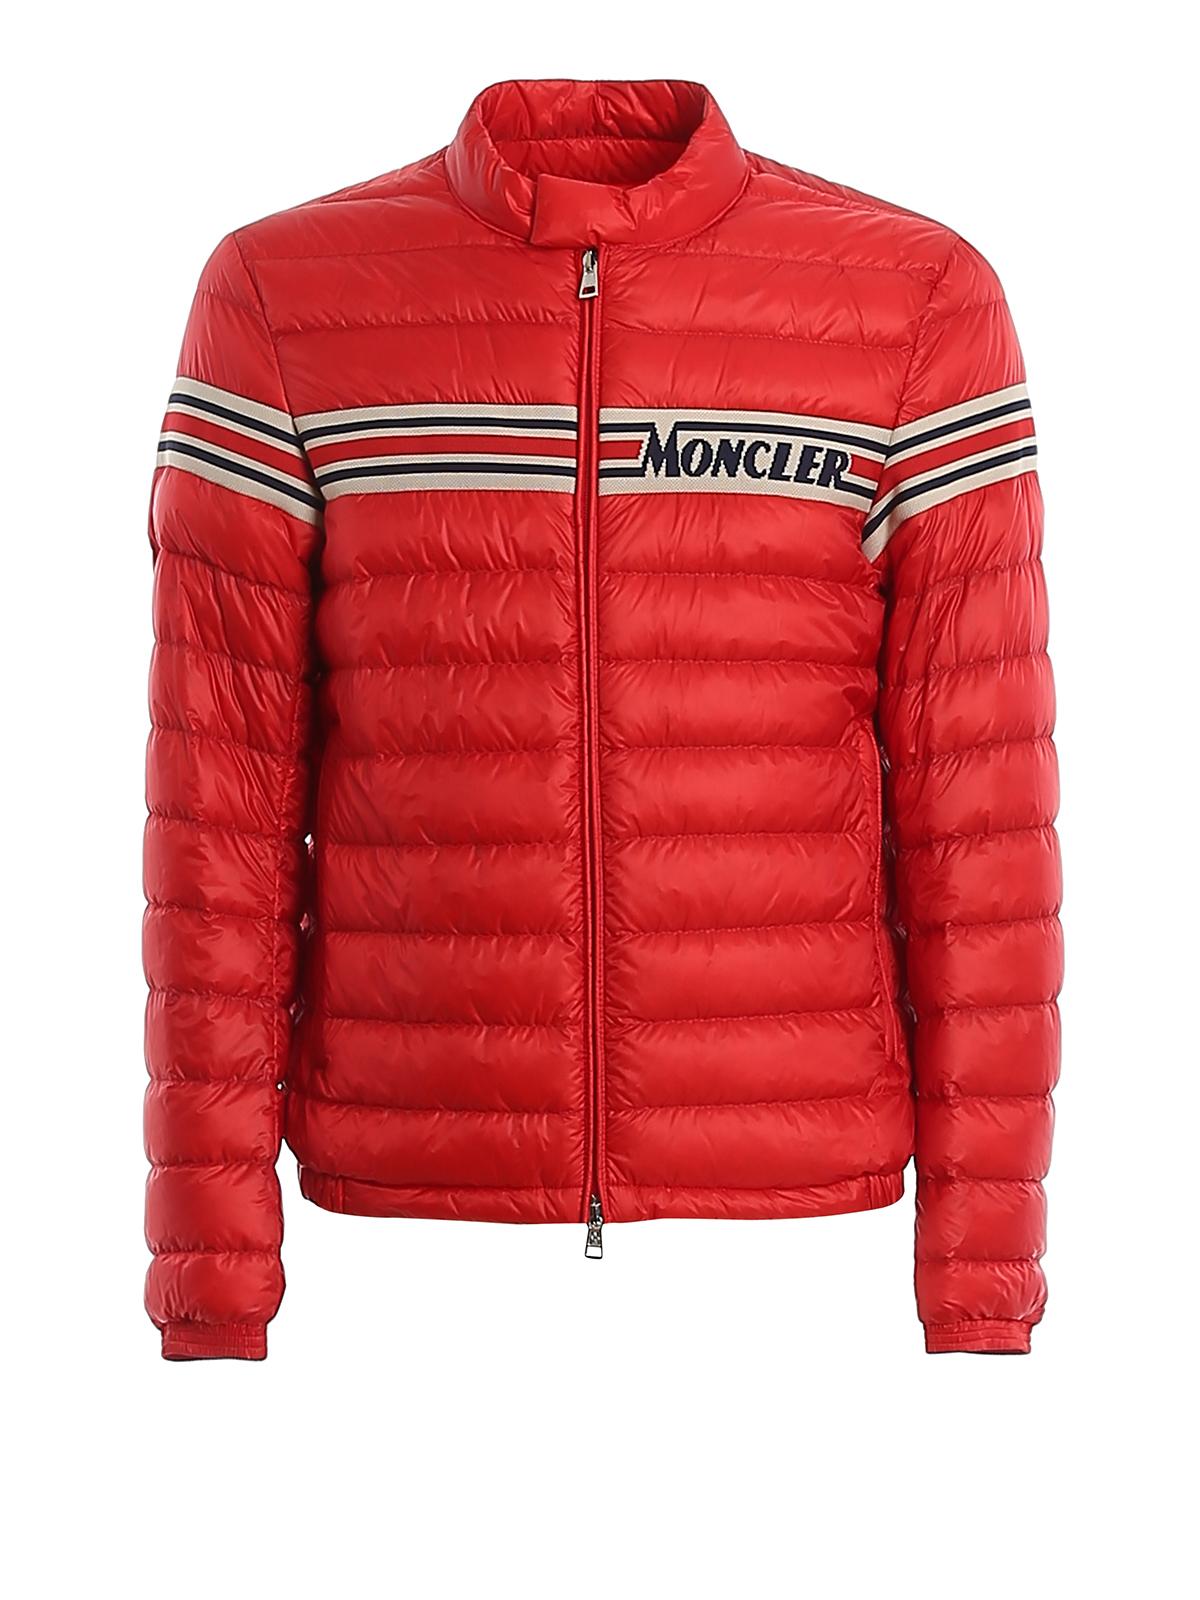 Moncler Synthetic Renald Puffer Moto Jacket in Red for Men - Save 63% - Lyst